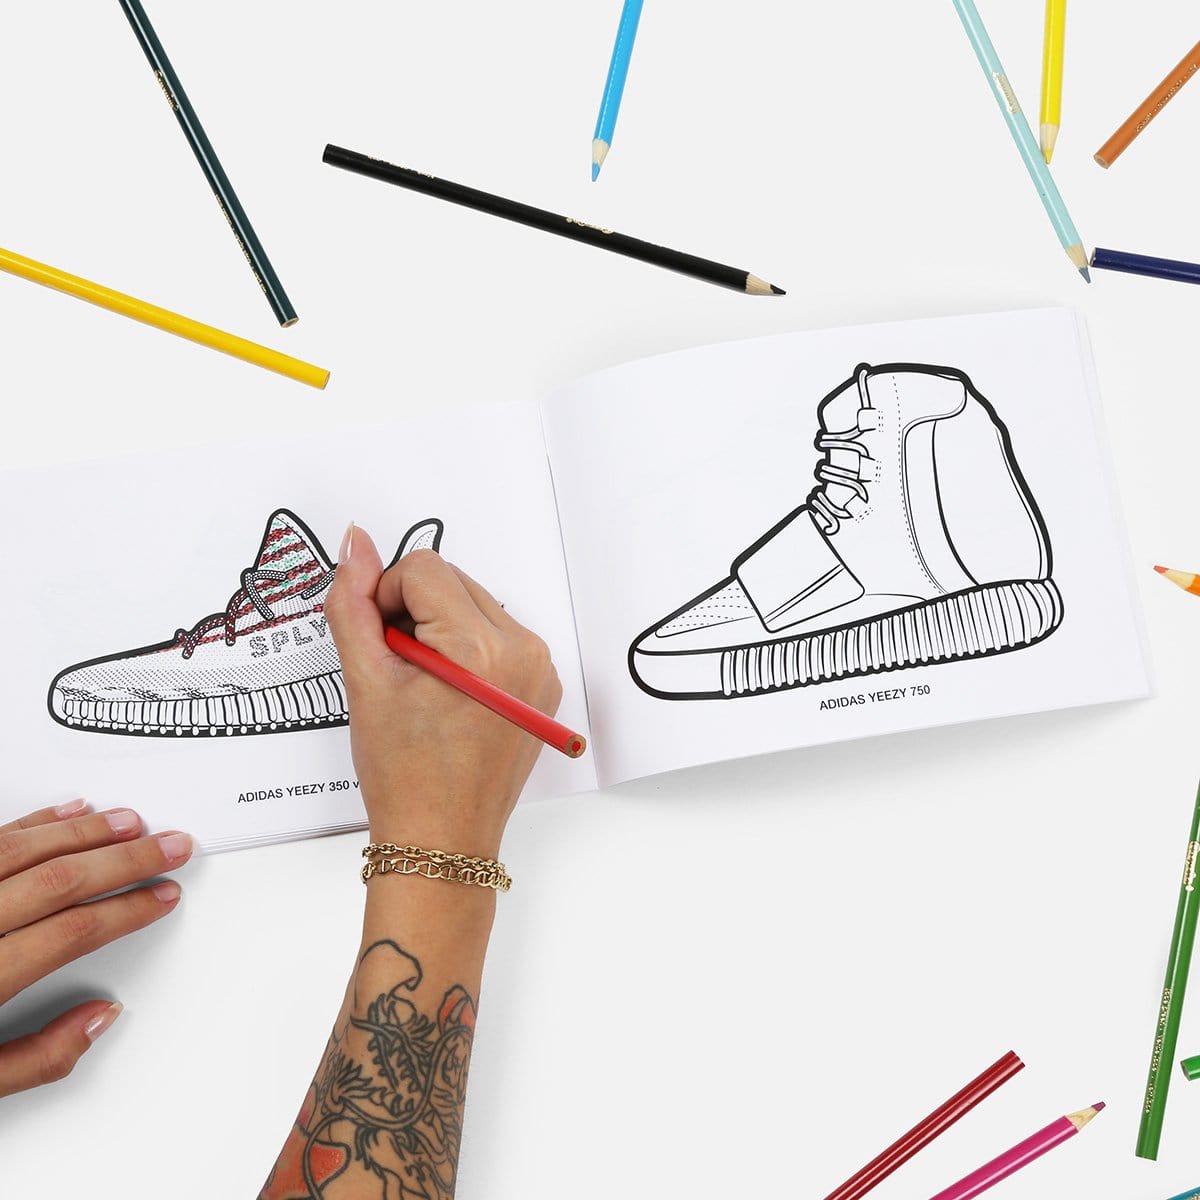 Colorways - A Sneaker Coloring Book